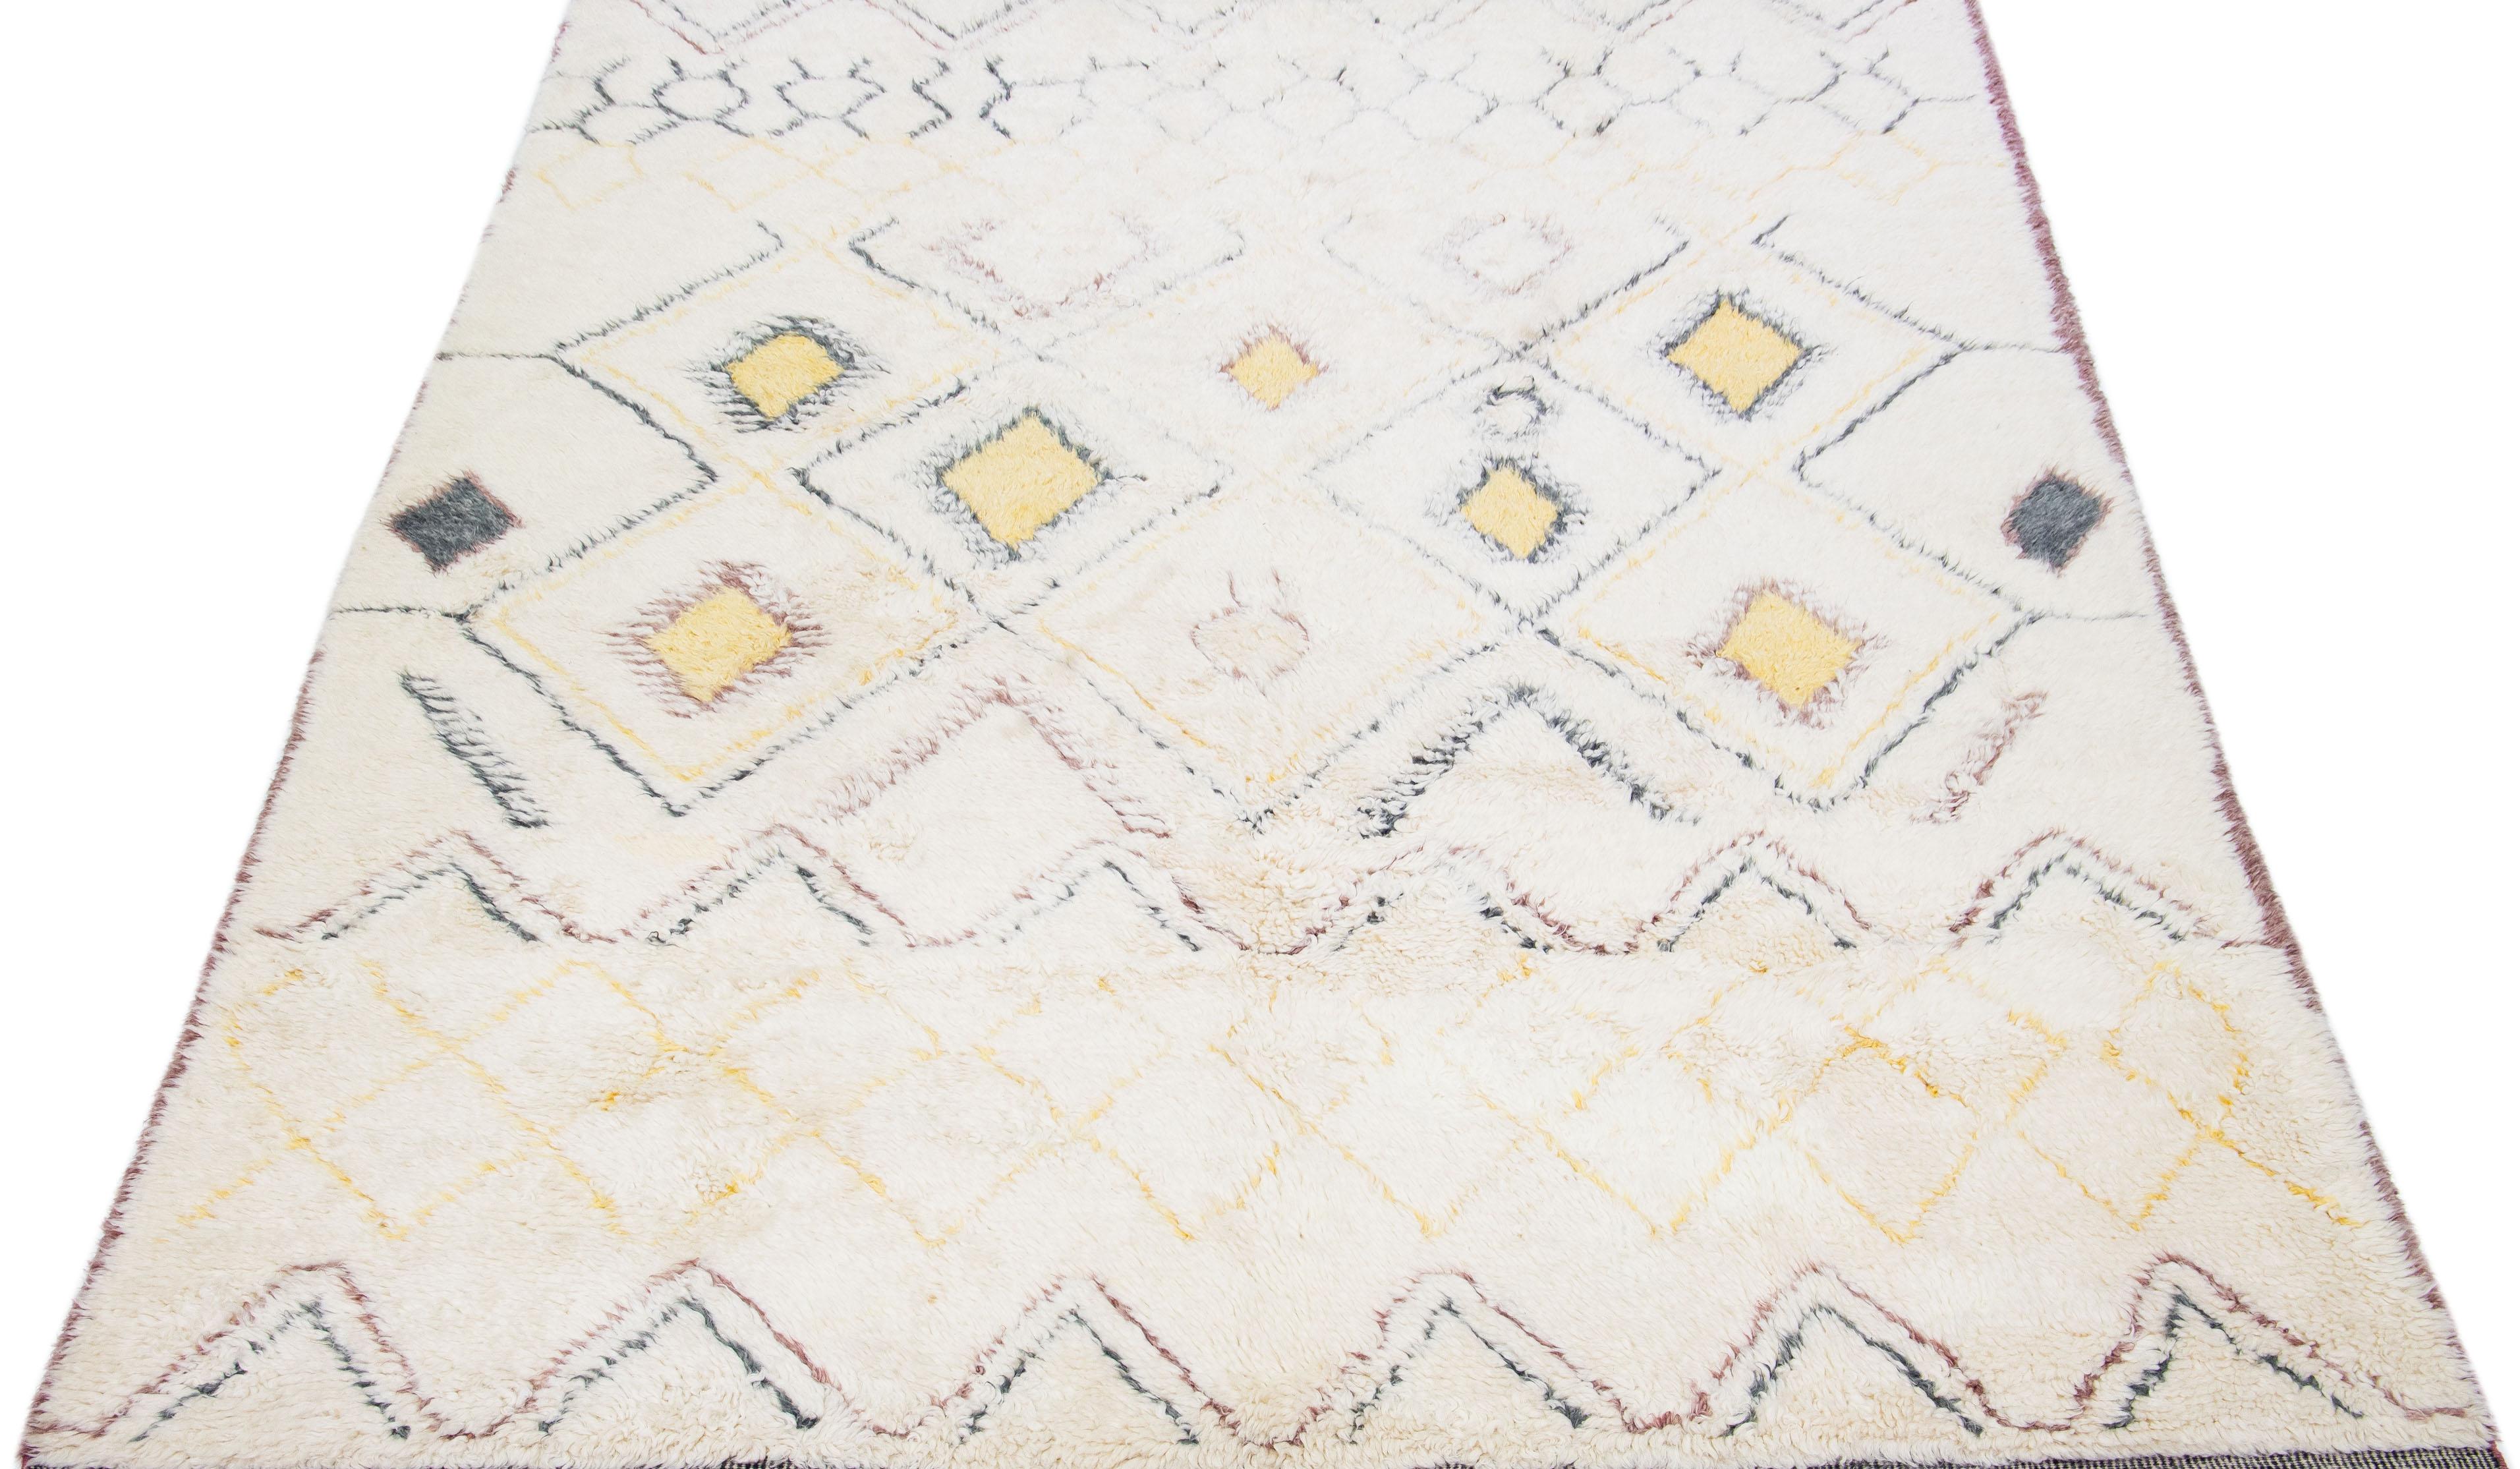 Beautiful Moroccan-style handmade wool rug with an Ivory color field. This Modern rug has gray, yellow, and brown accents featuring a gorgeous all-over geometric tribal design.

This rug measures: 9'3